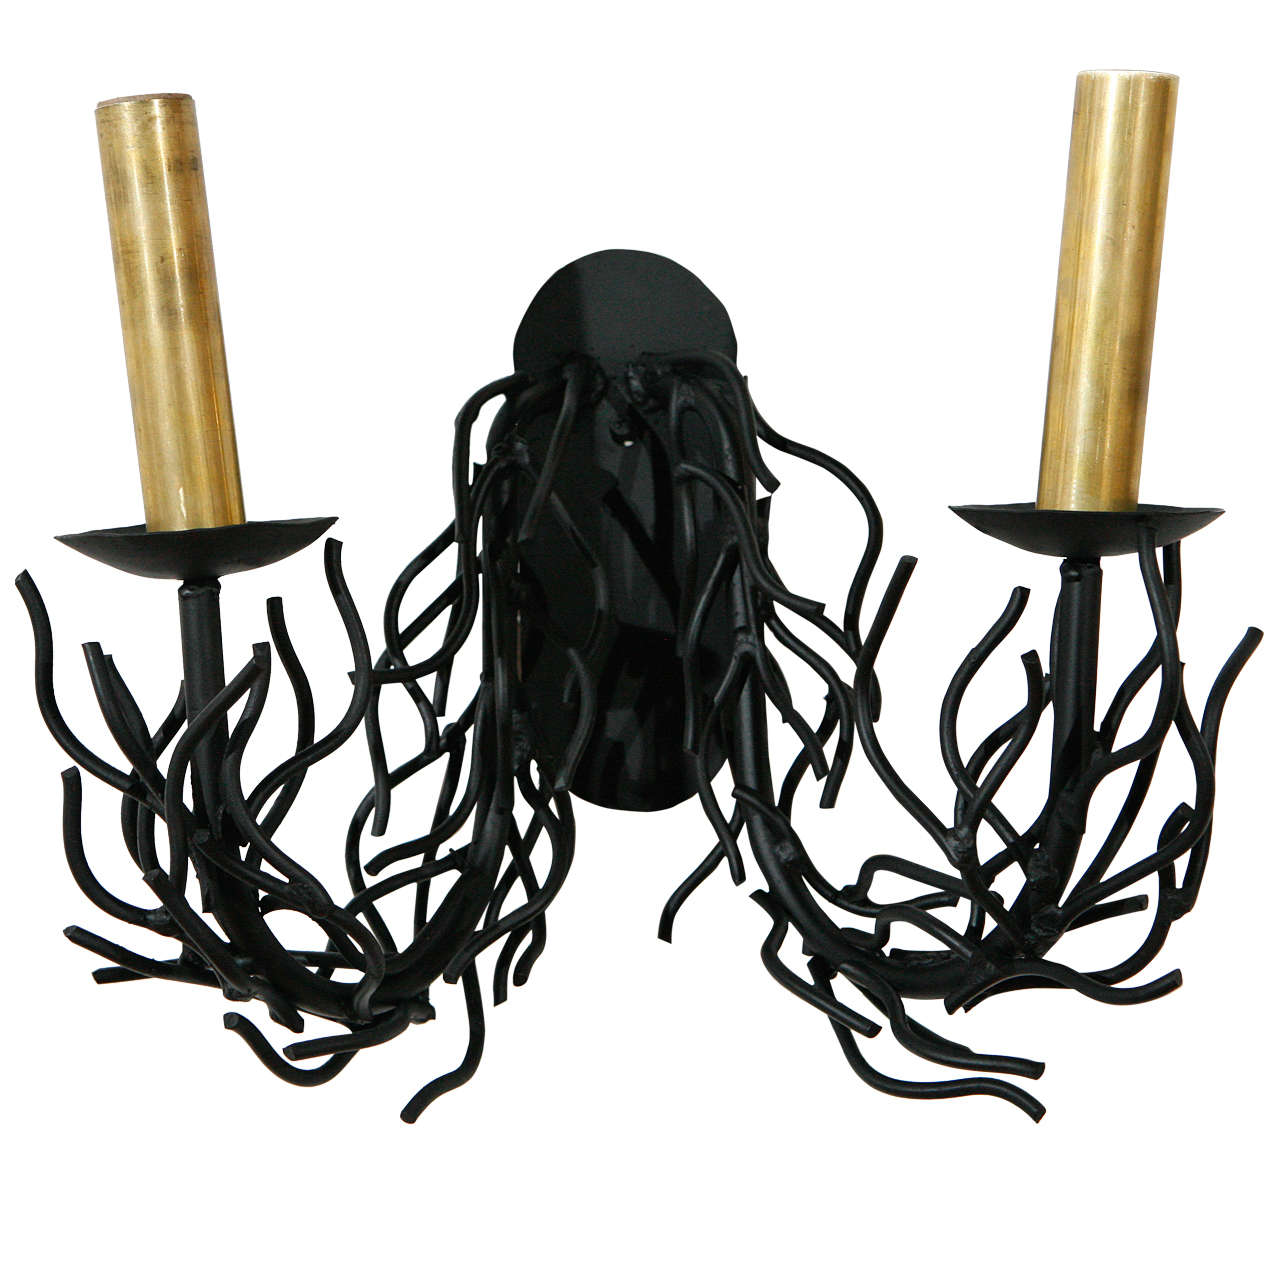 One Double Faux Coral Sconce For Sale